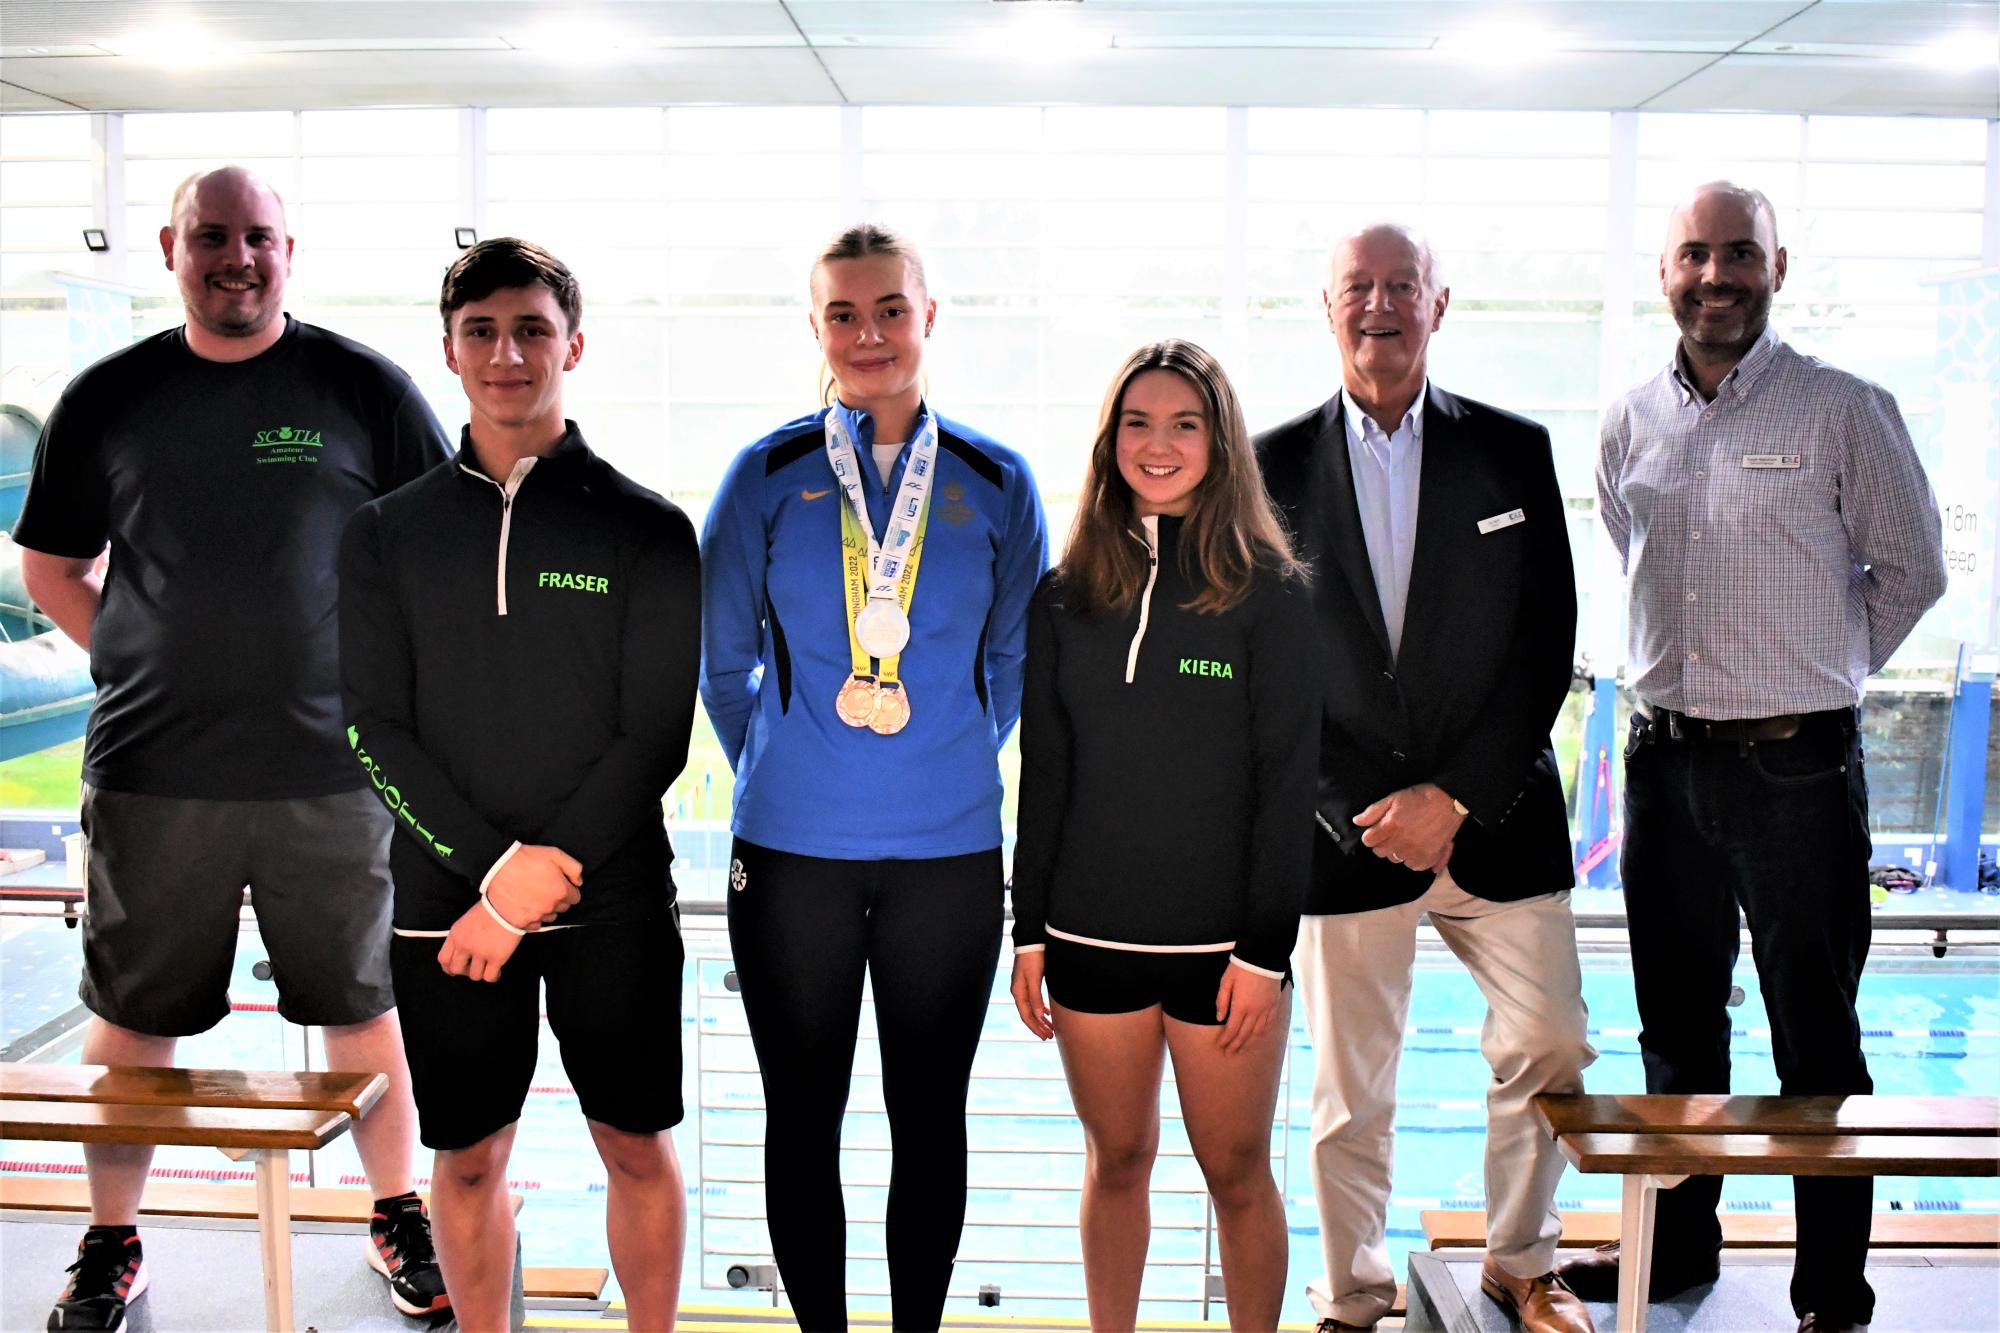 •	Pictured (from left) are: Scotia Head Coach Jonny Sprot; Scotia Club Captain Fraser Baird; Katie; Scotia Club Captain Kiera Hart; Jim Neill, Chair of EDLC Trust; and Fraser Makeham, Operations Manager - Leisuredrome.